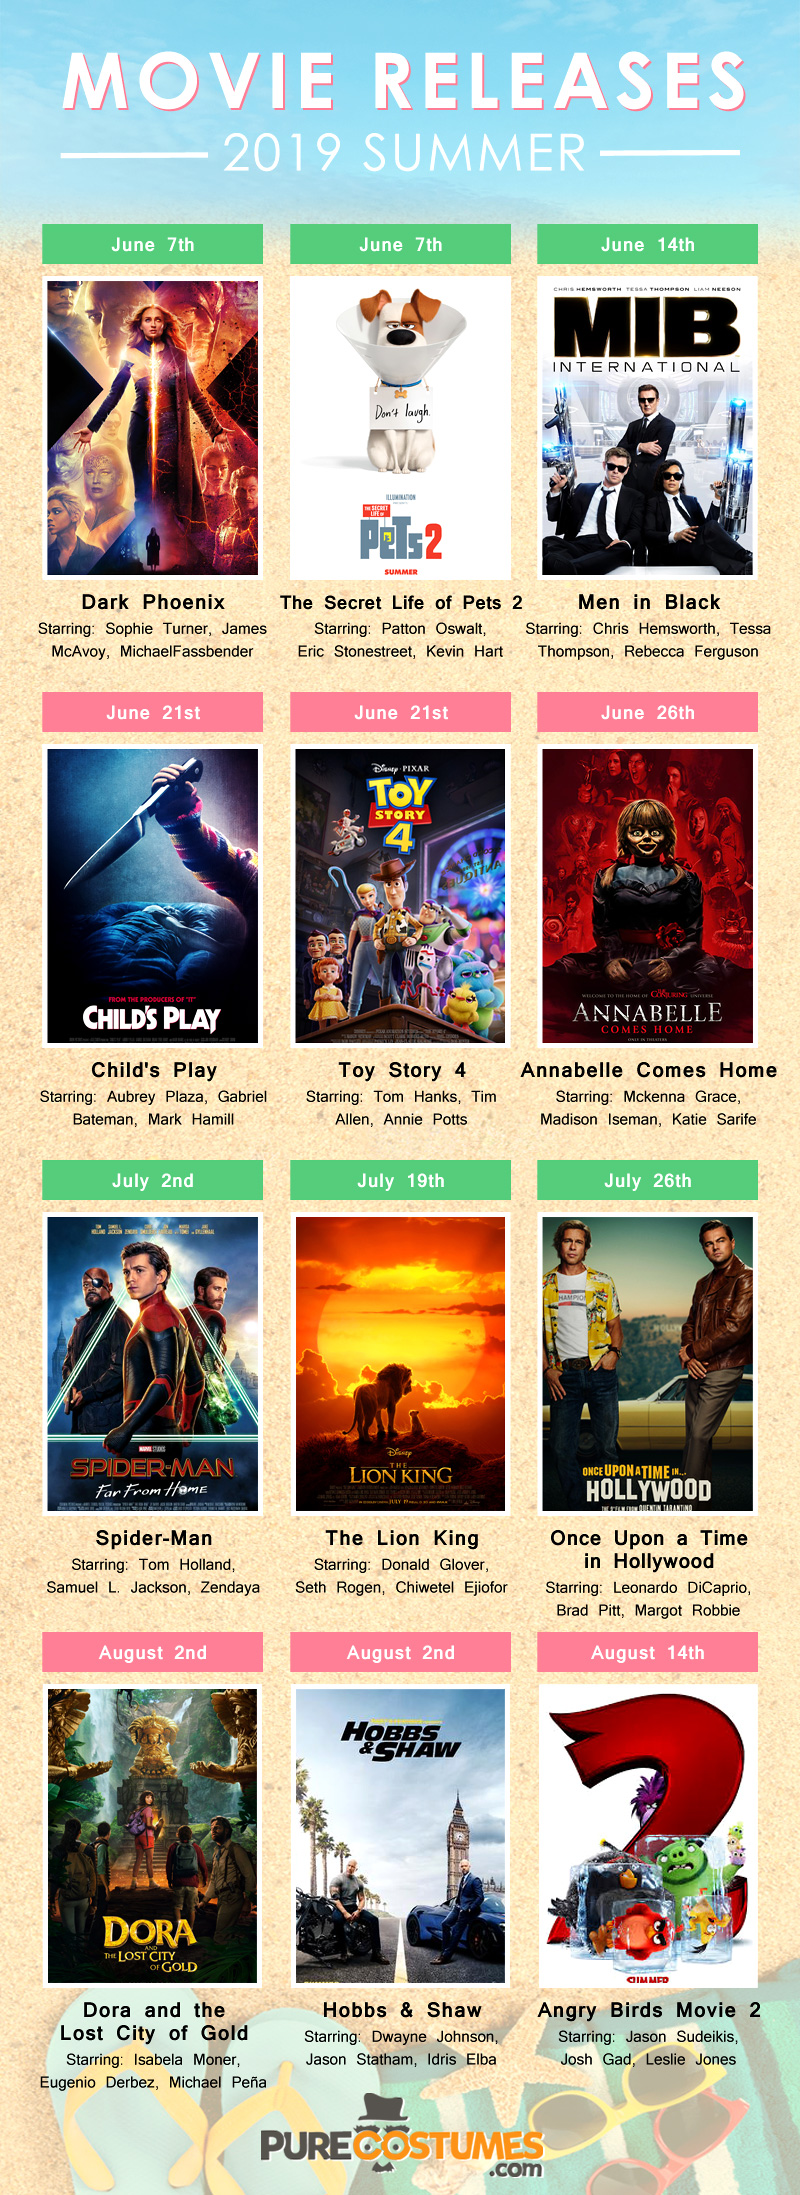 Summer 2019 Movie Releases Infographic